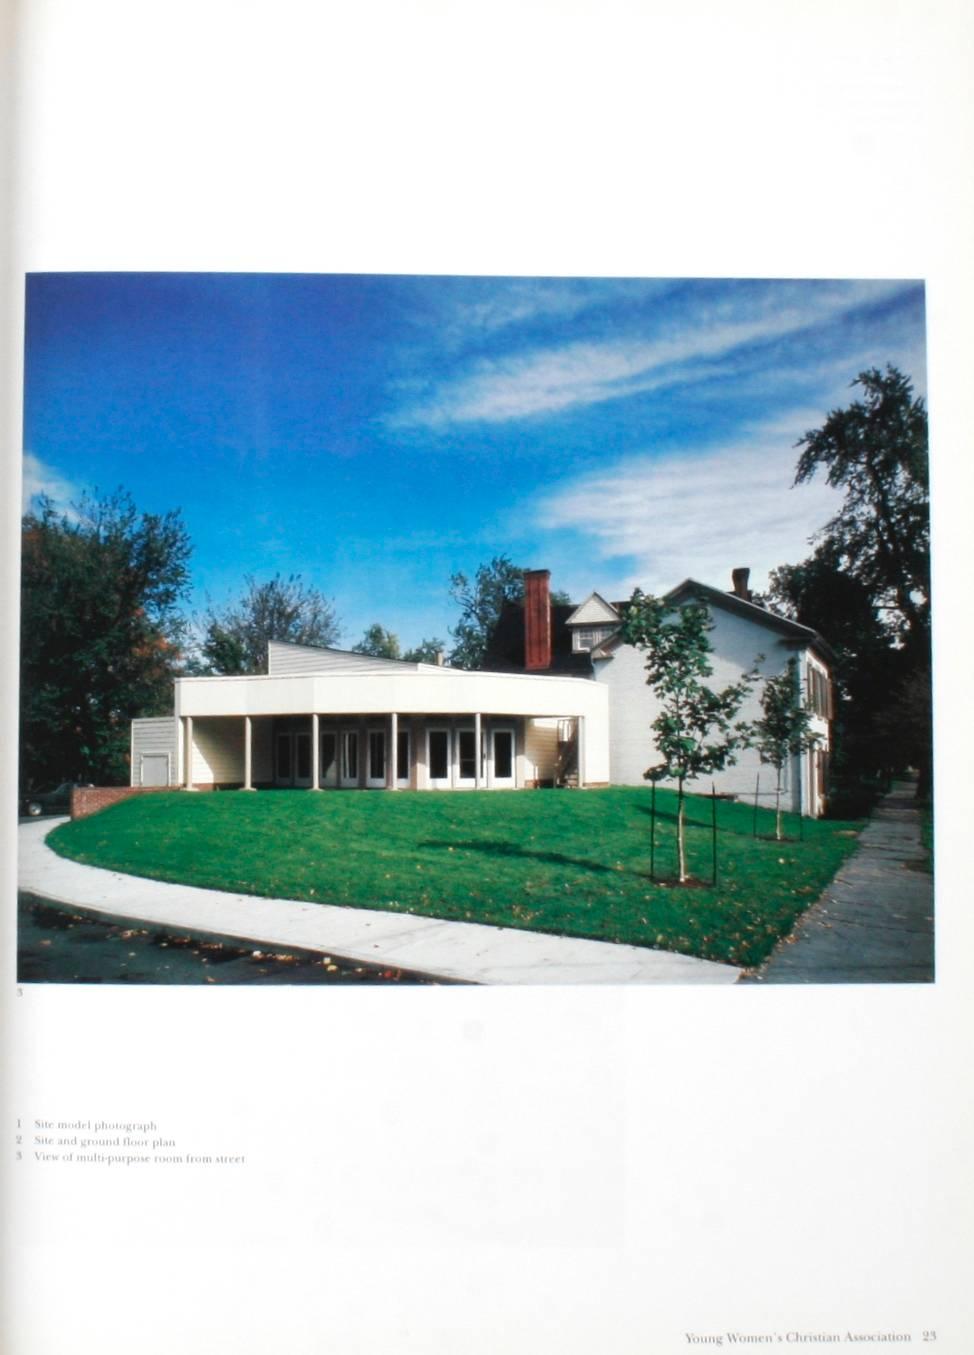 The Master Architect Series III, R.M. Kliment & Frances Halsband Architects, Selected and Current Works. Mulgrave: The Images Publishing Group Pty Ltd., 1998. A book on the works of New York architectural firm Kliment Halsband Architects. Third in a